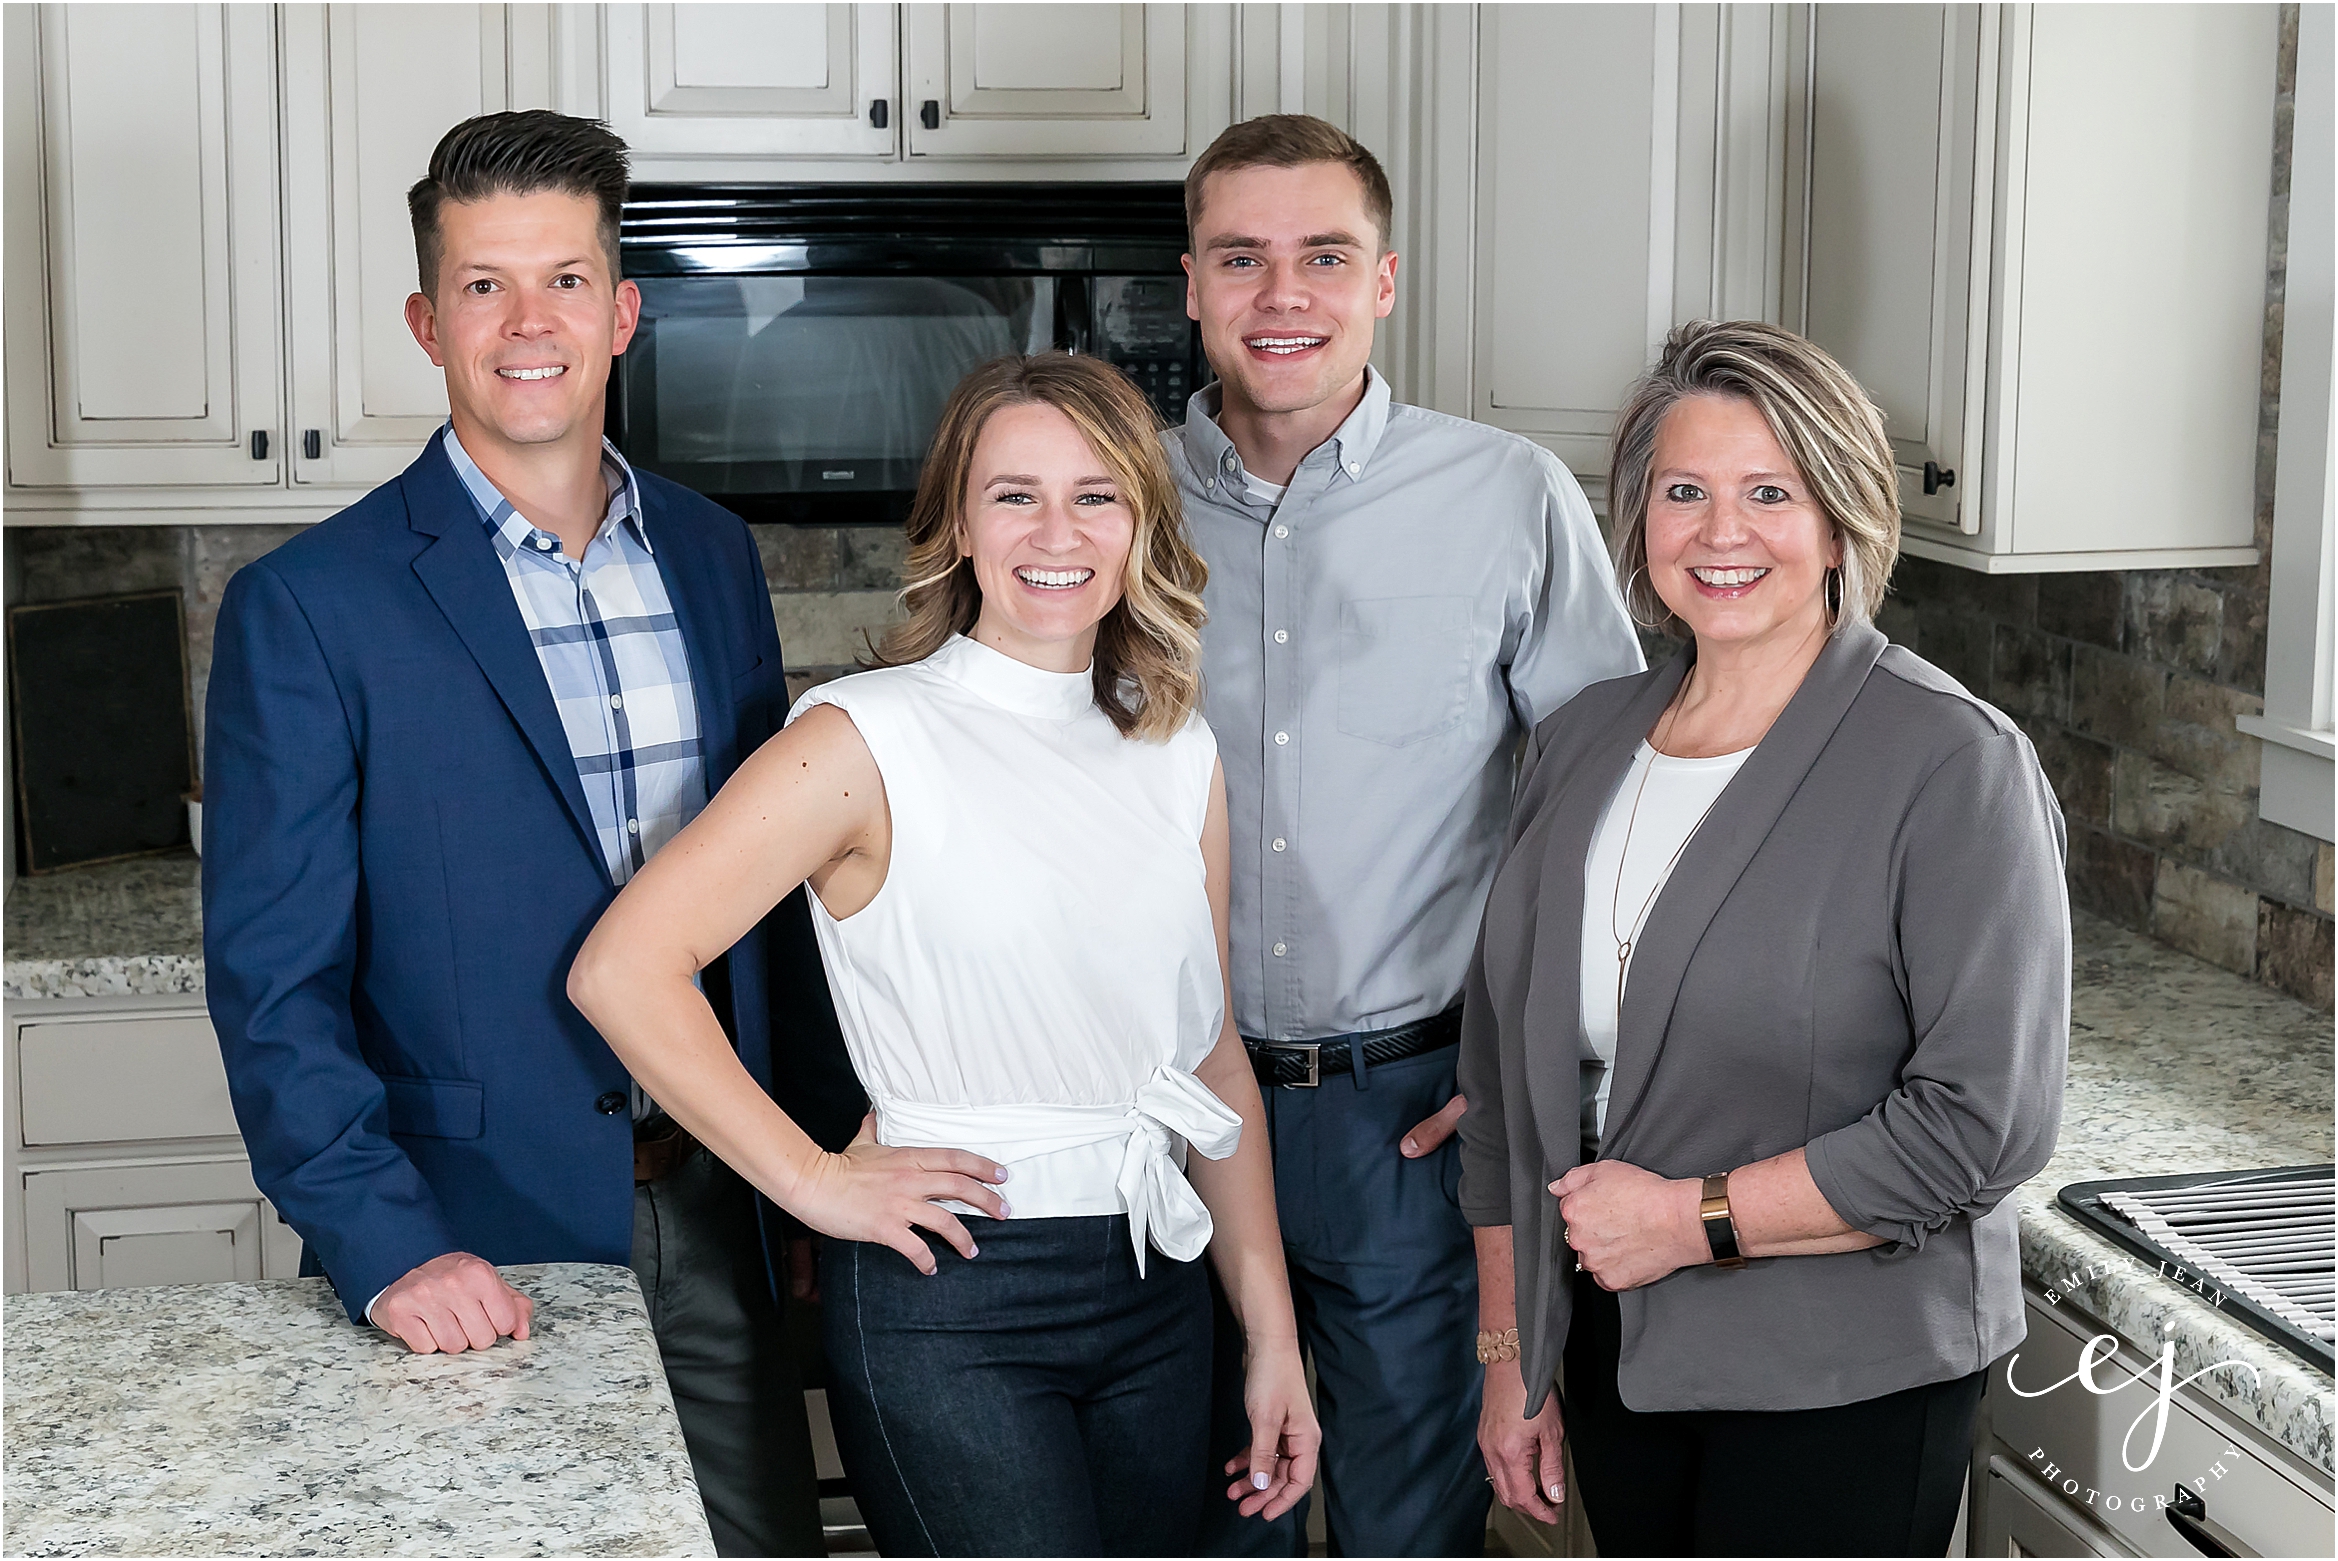 Top real estate agent lacrosse Wisconsin team standing in kitchen one trust